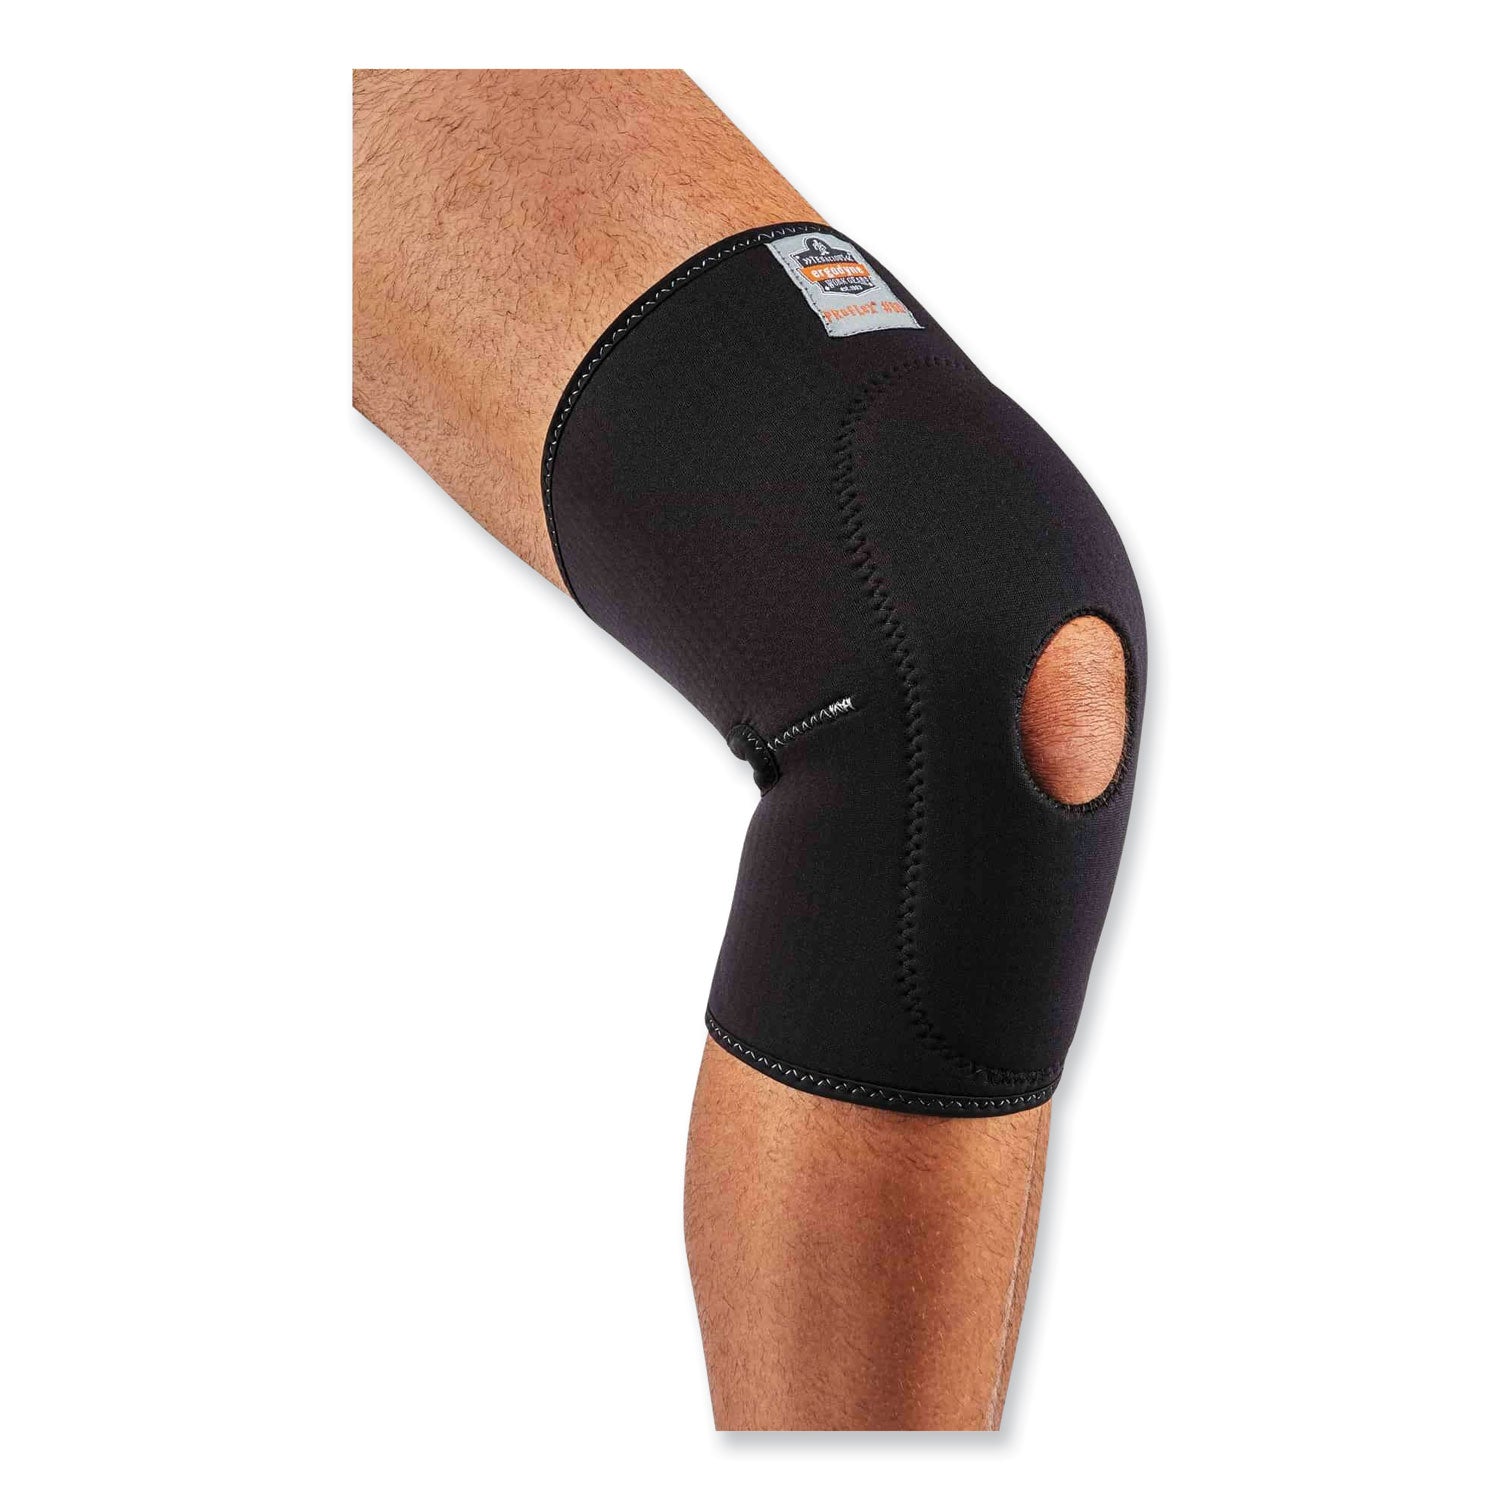 proflex-615-open-patella-anterior-pad-knee-sleeve-small-black-ships-in-1-3-business-days_ego16532 - 3